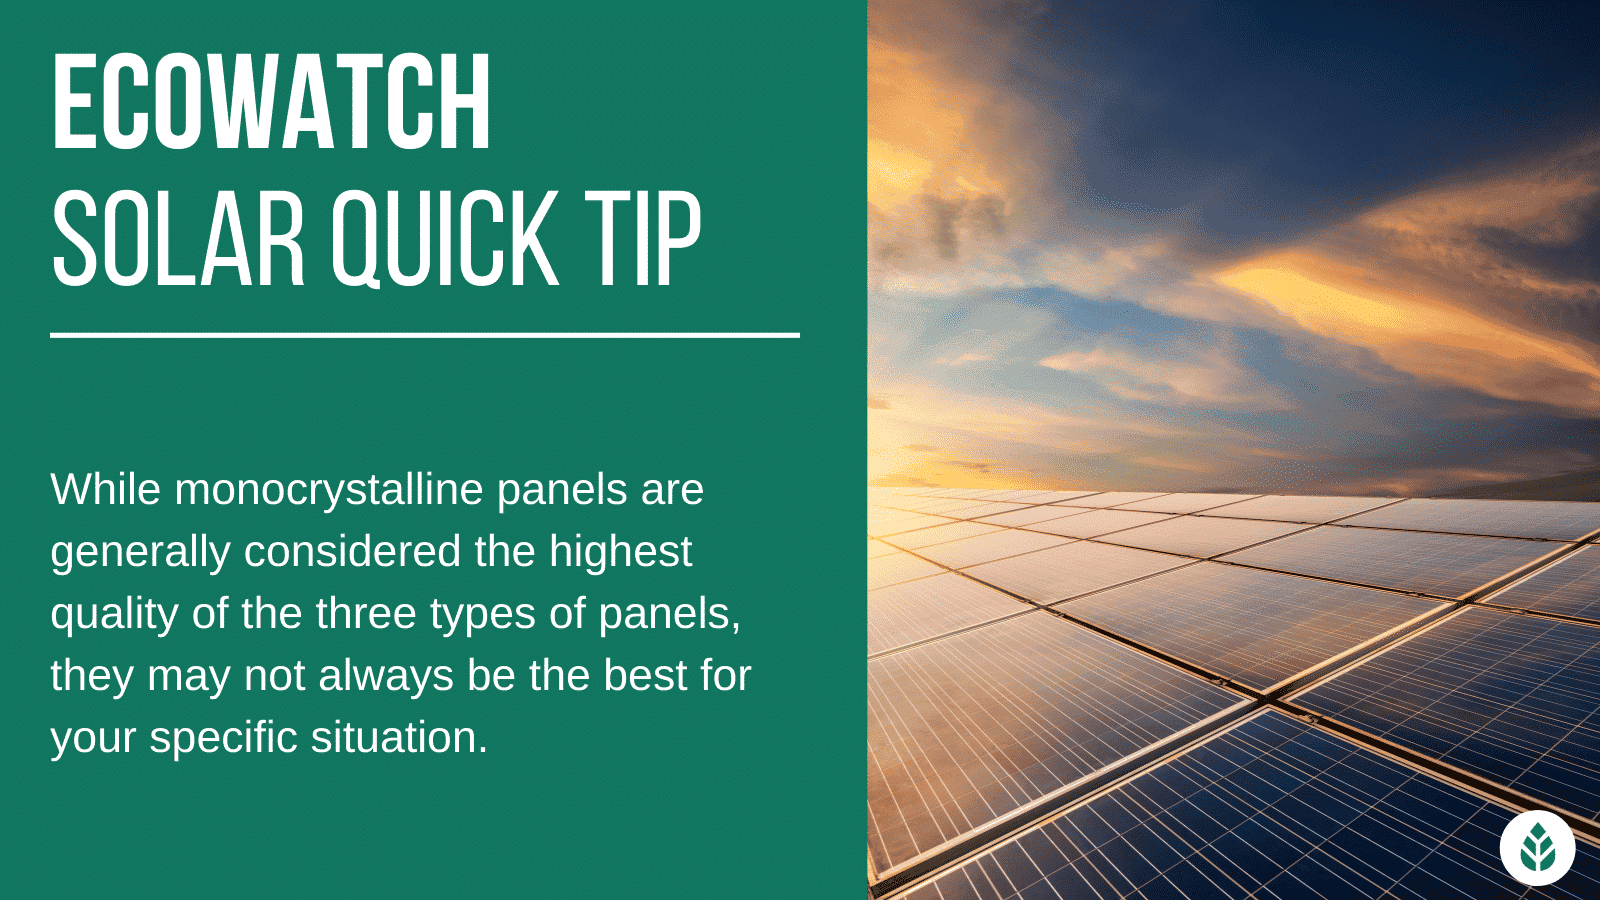 monocrystalline panels might not be the best choice for every home